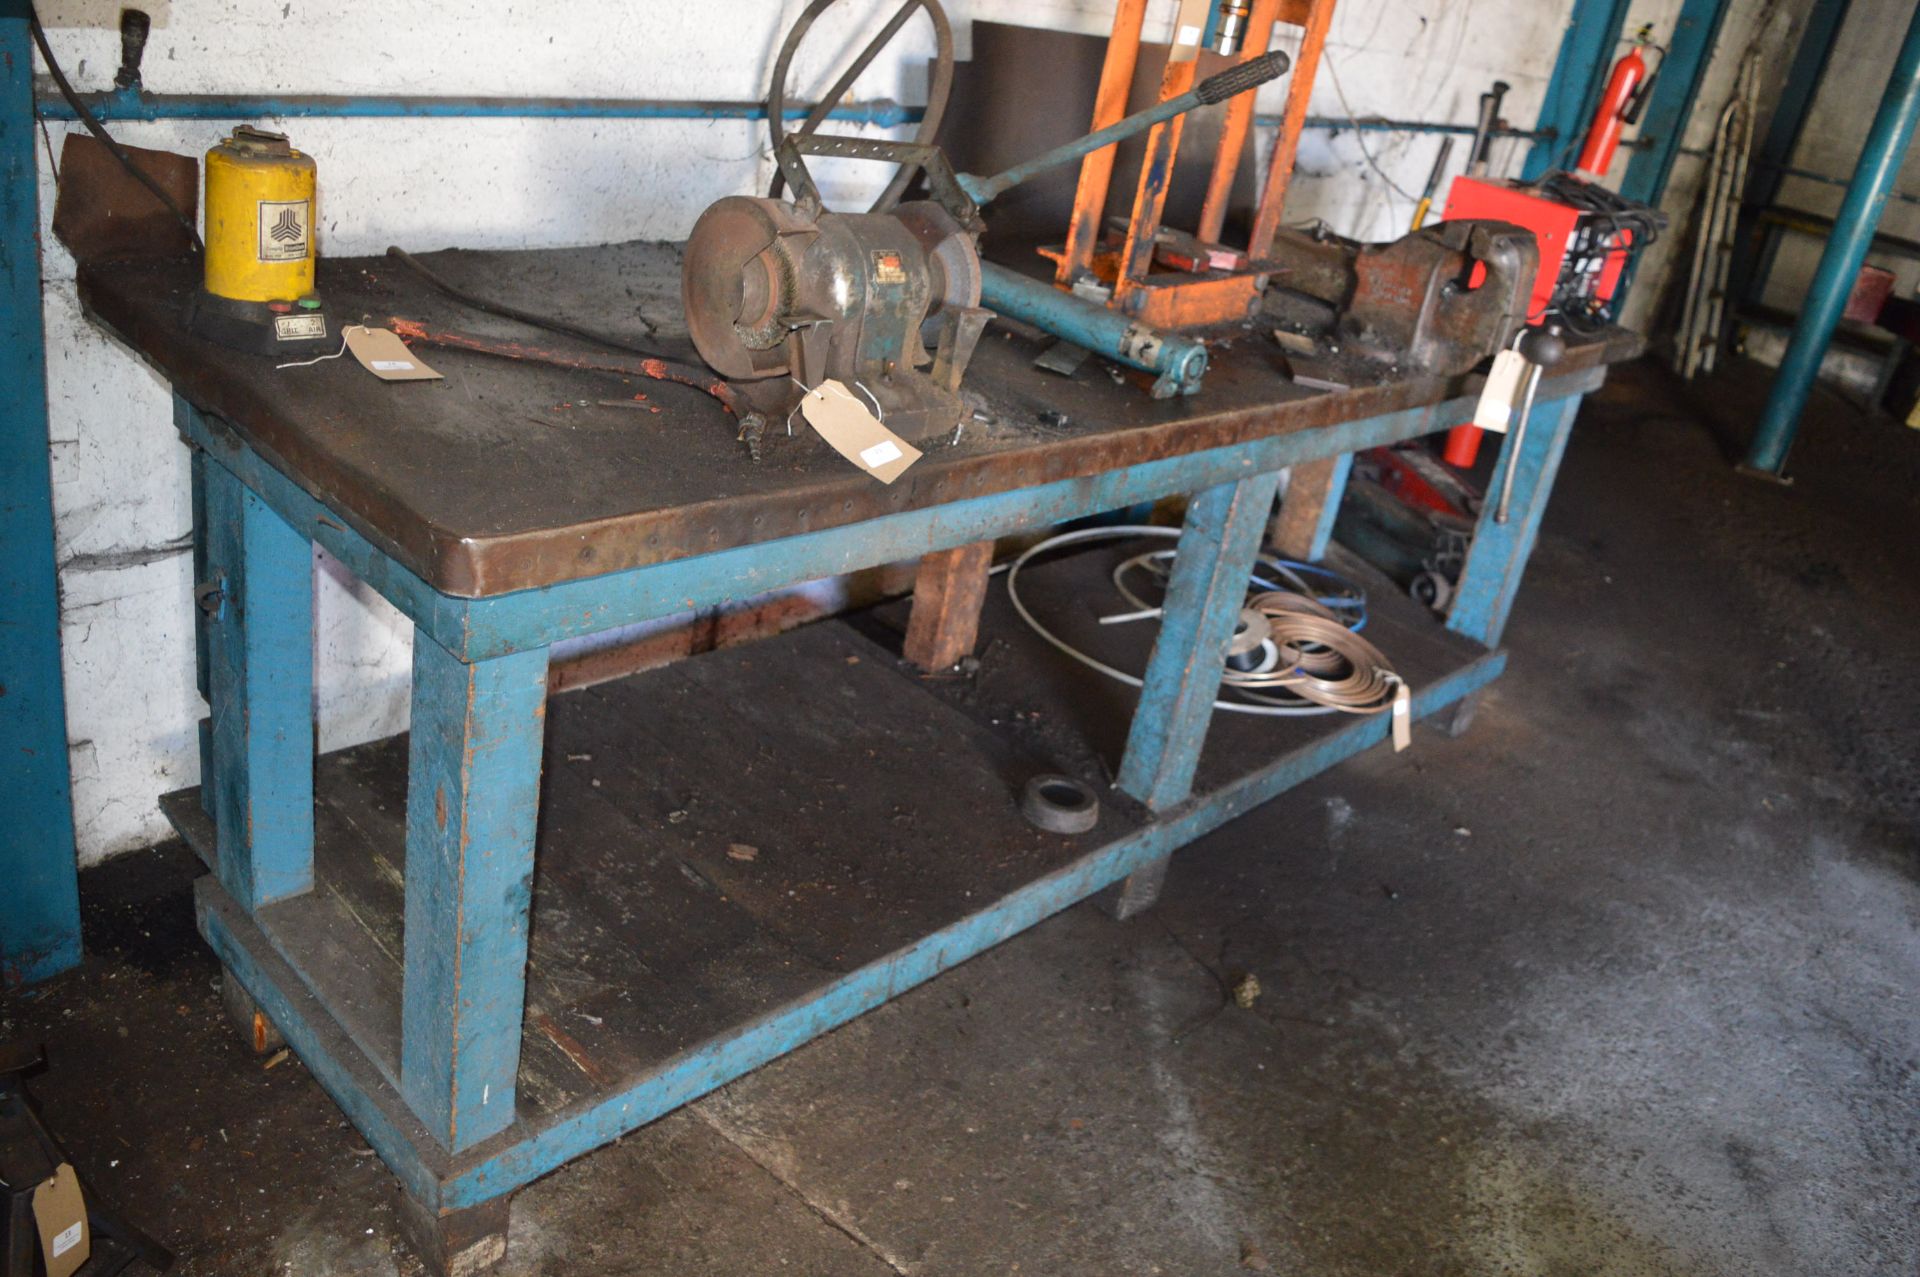 Workbench 268x88cm x 92cm tall with Samsonia 6” Vice (contents not included)